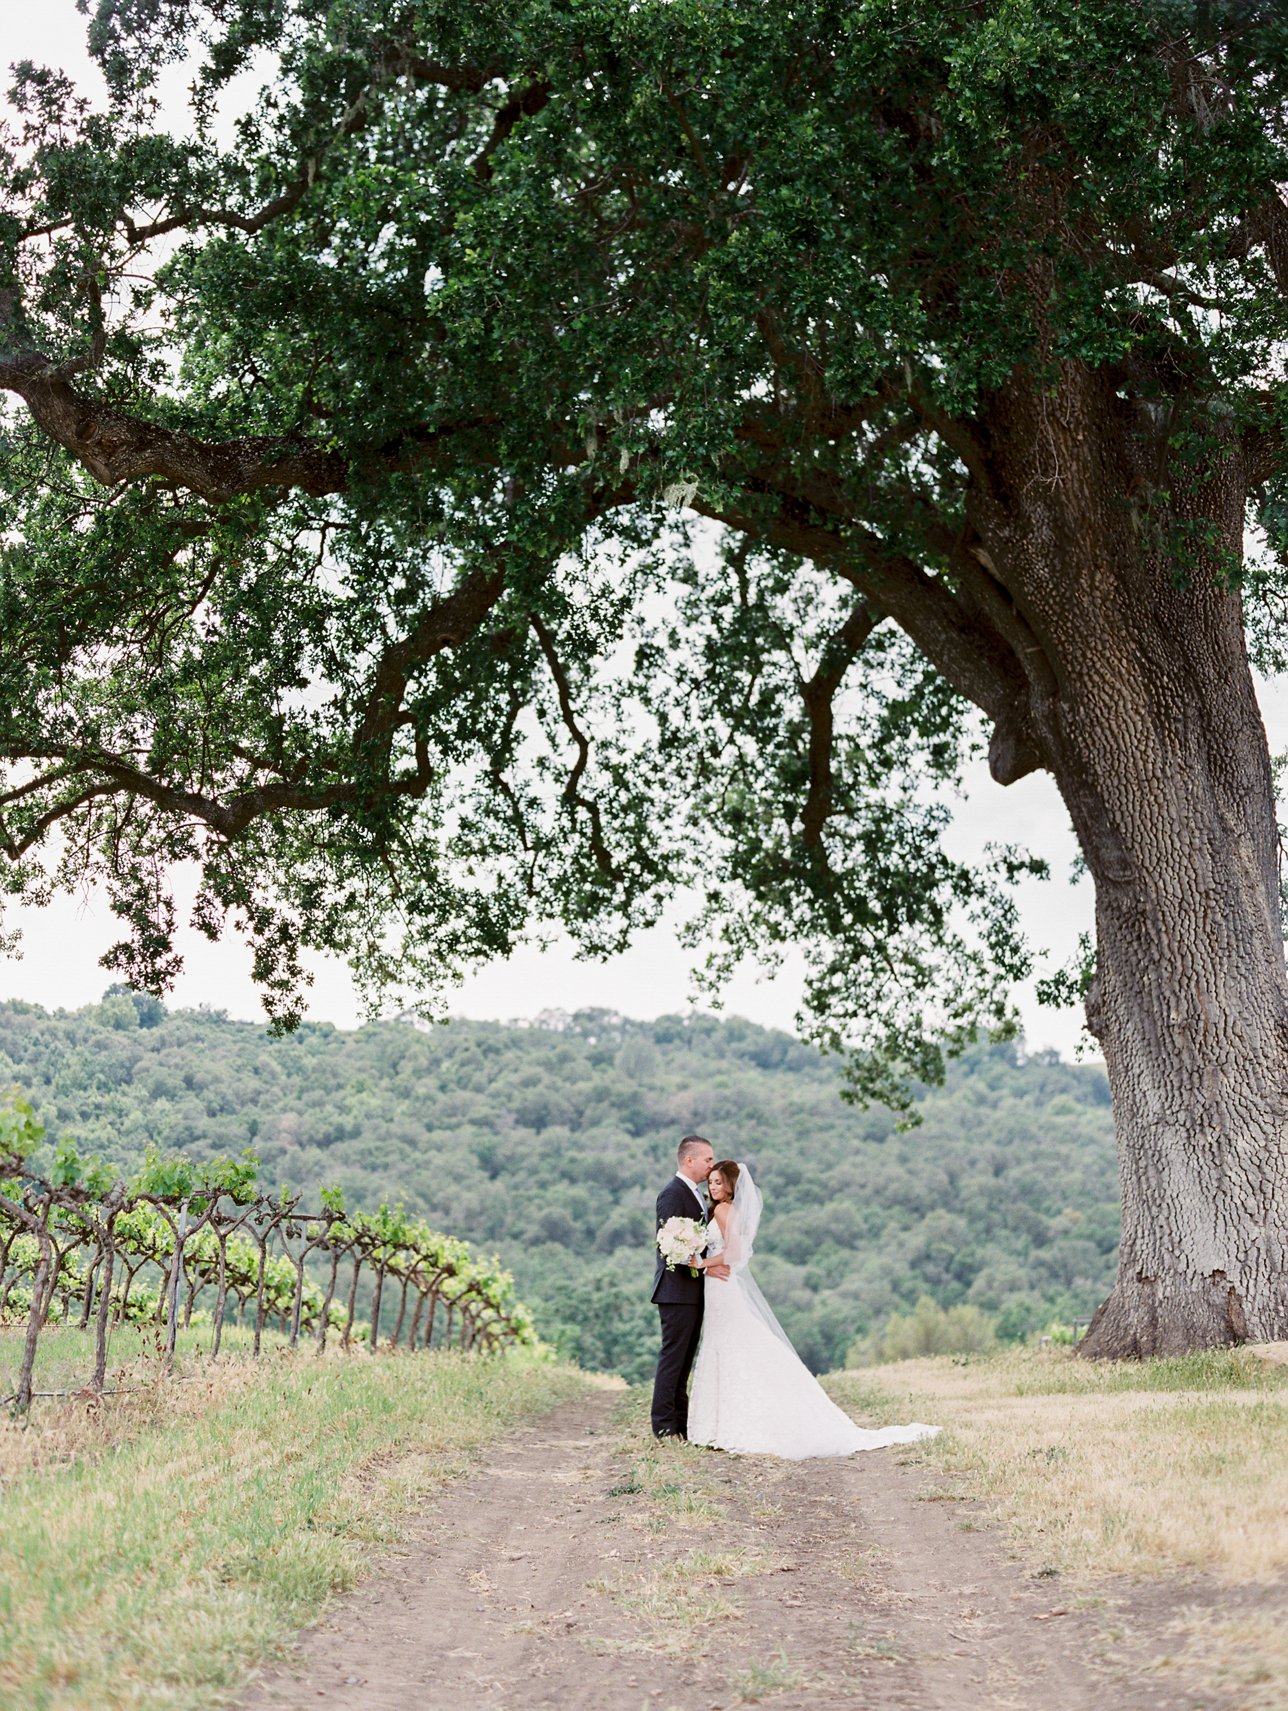 HammerSky Vineyards wedding photos - Paso Robles Wedding Photographer | Rachel Solomon Photography_9037